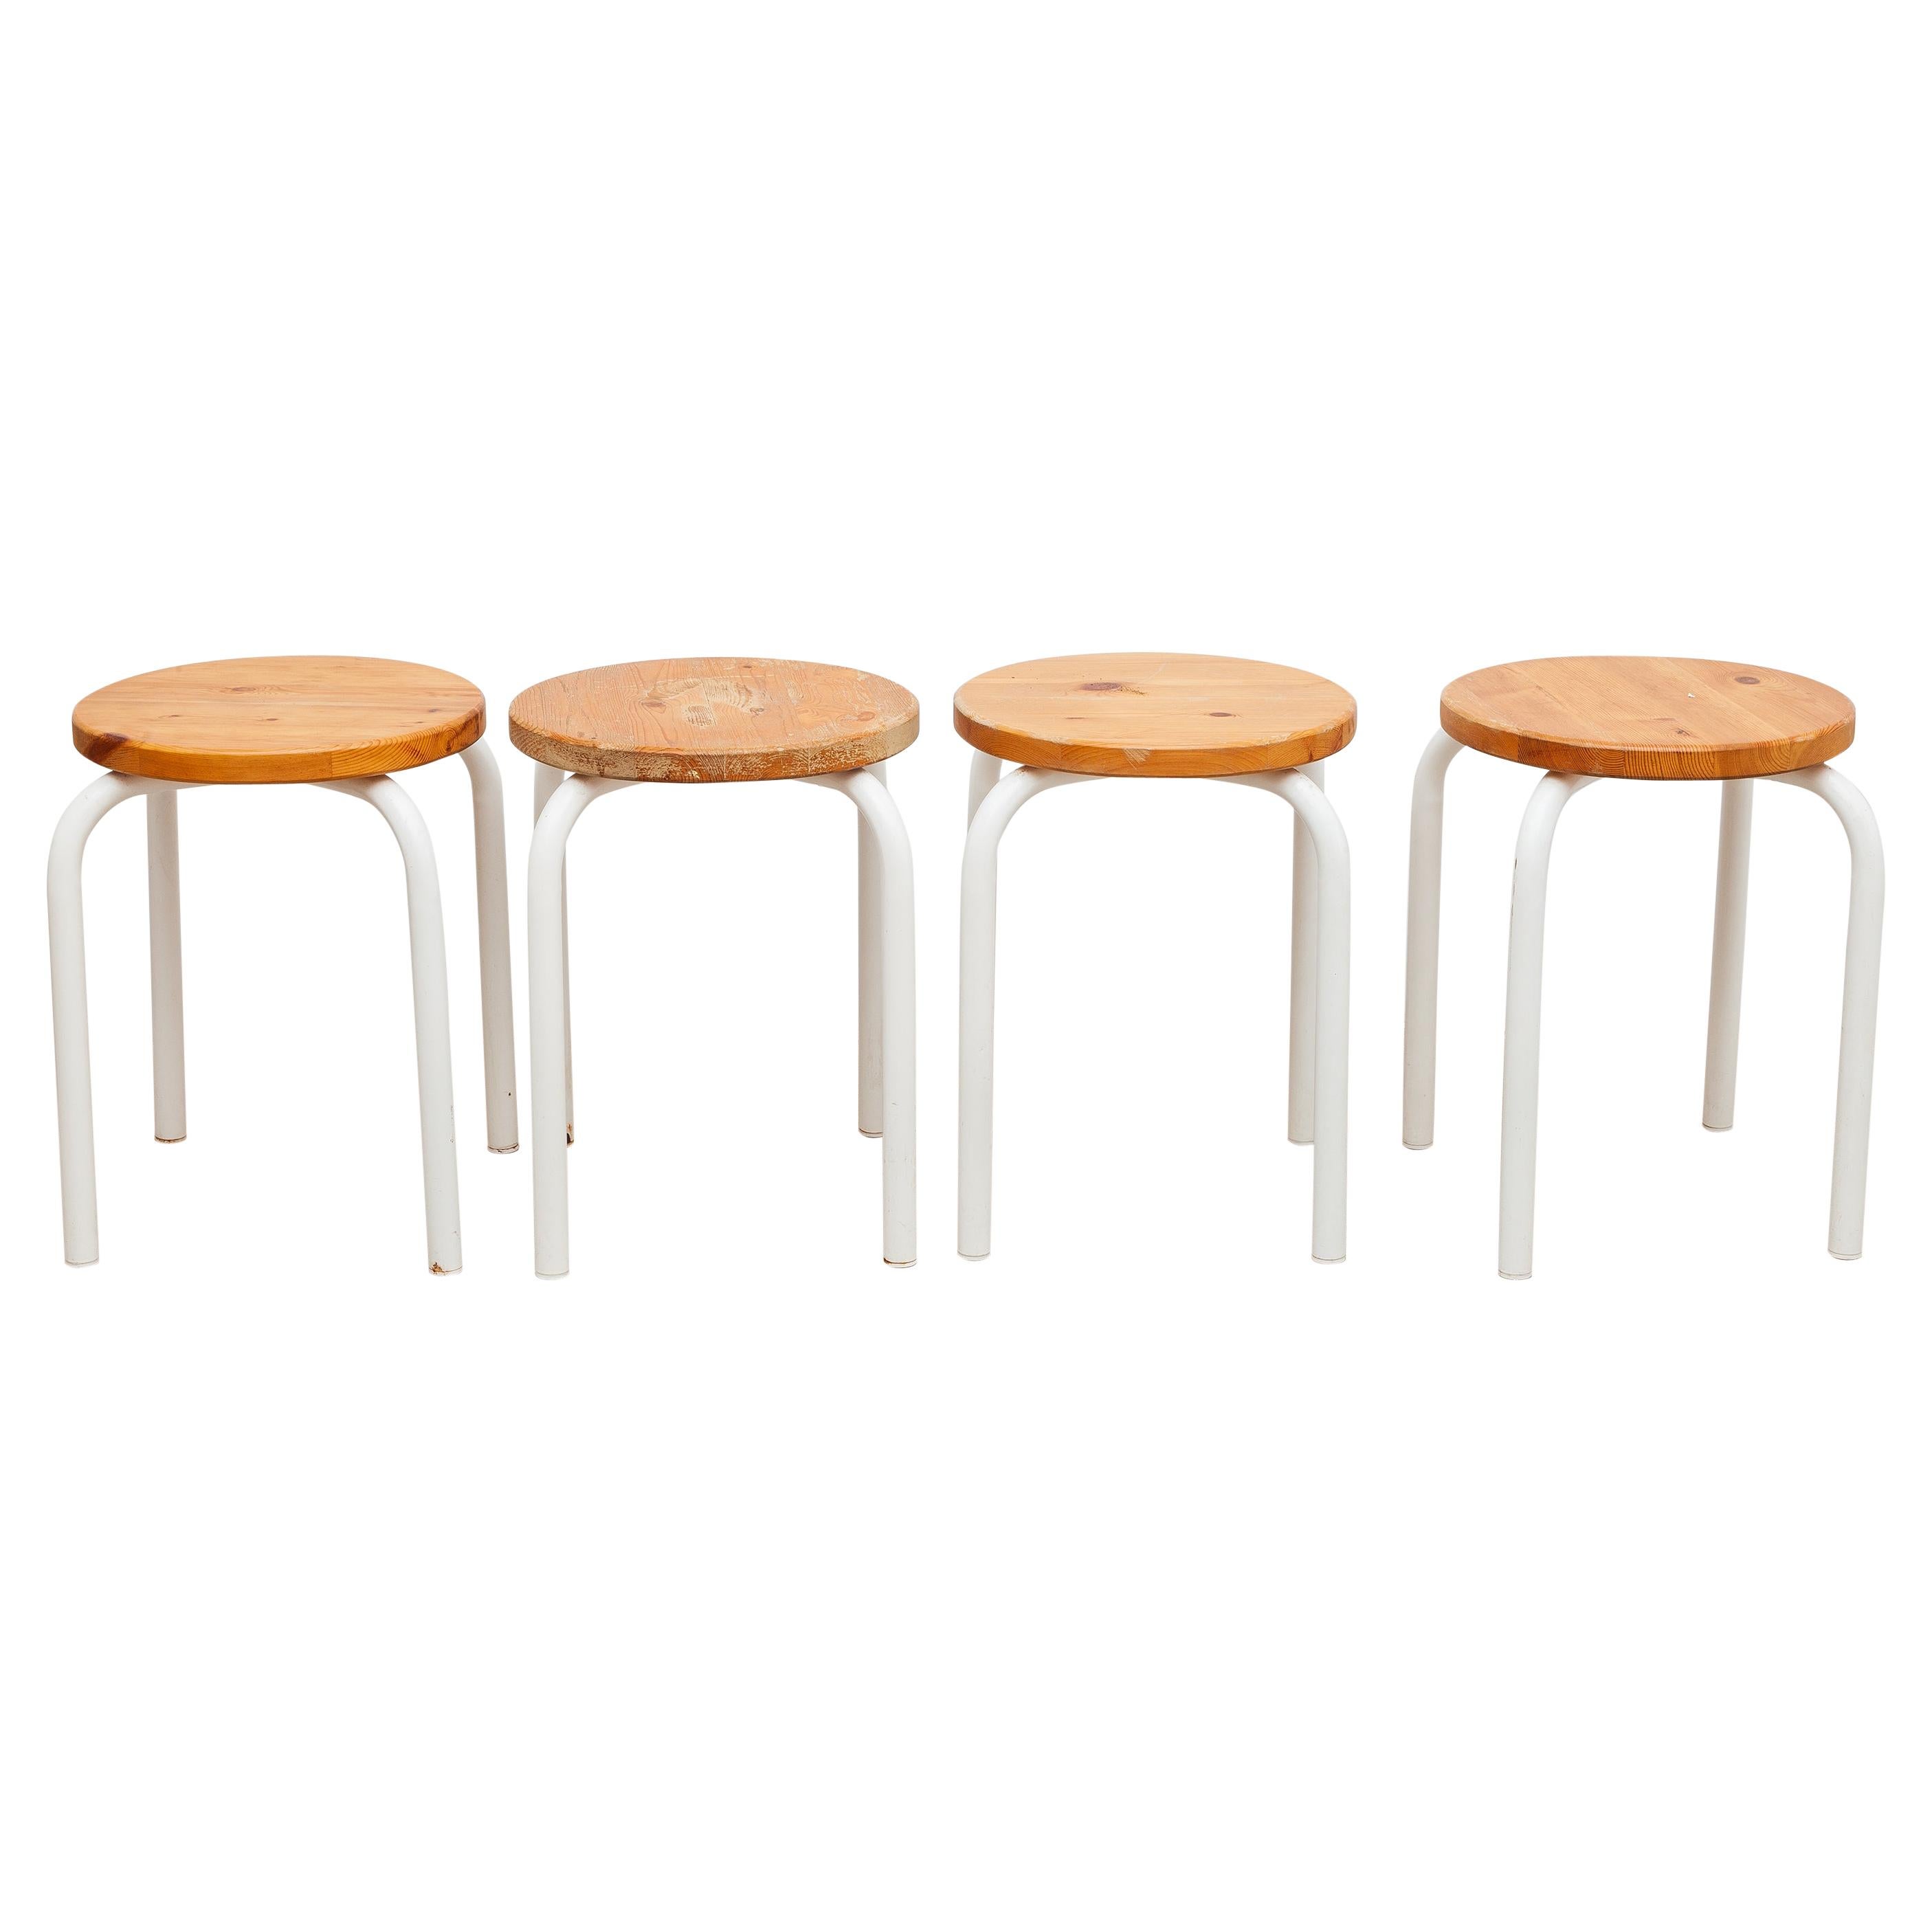 Set of Four Tubax Stacking Stools with Pine Seats, 1950s